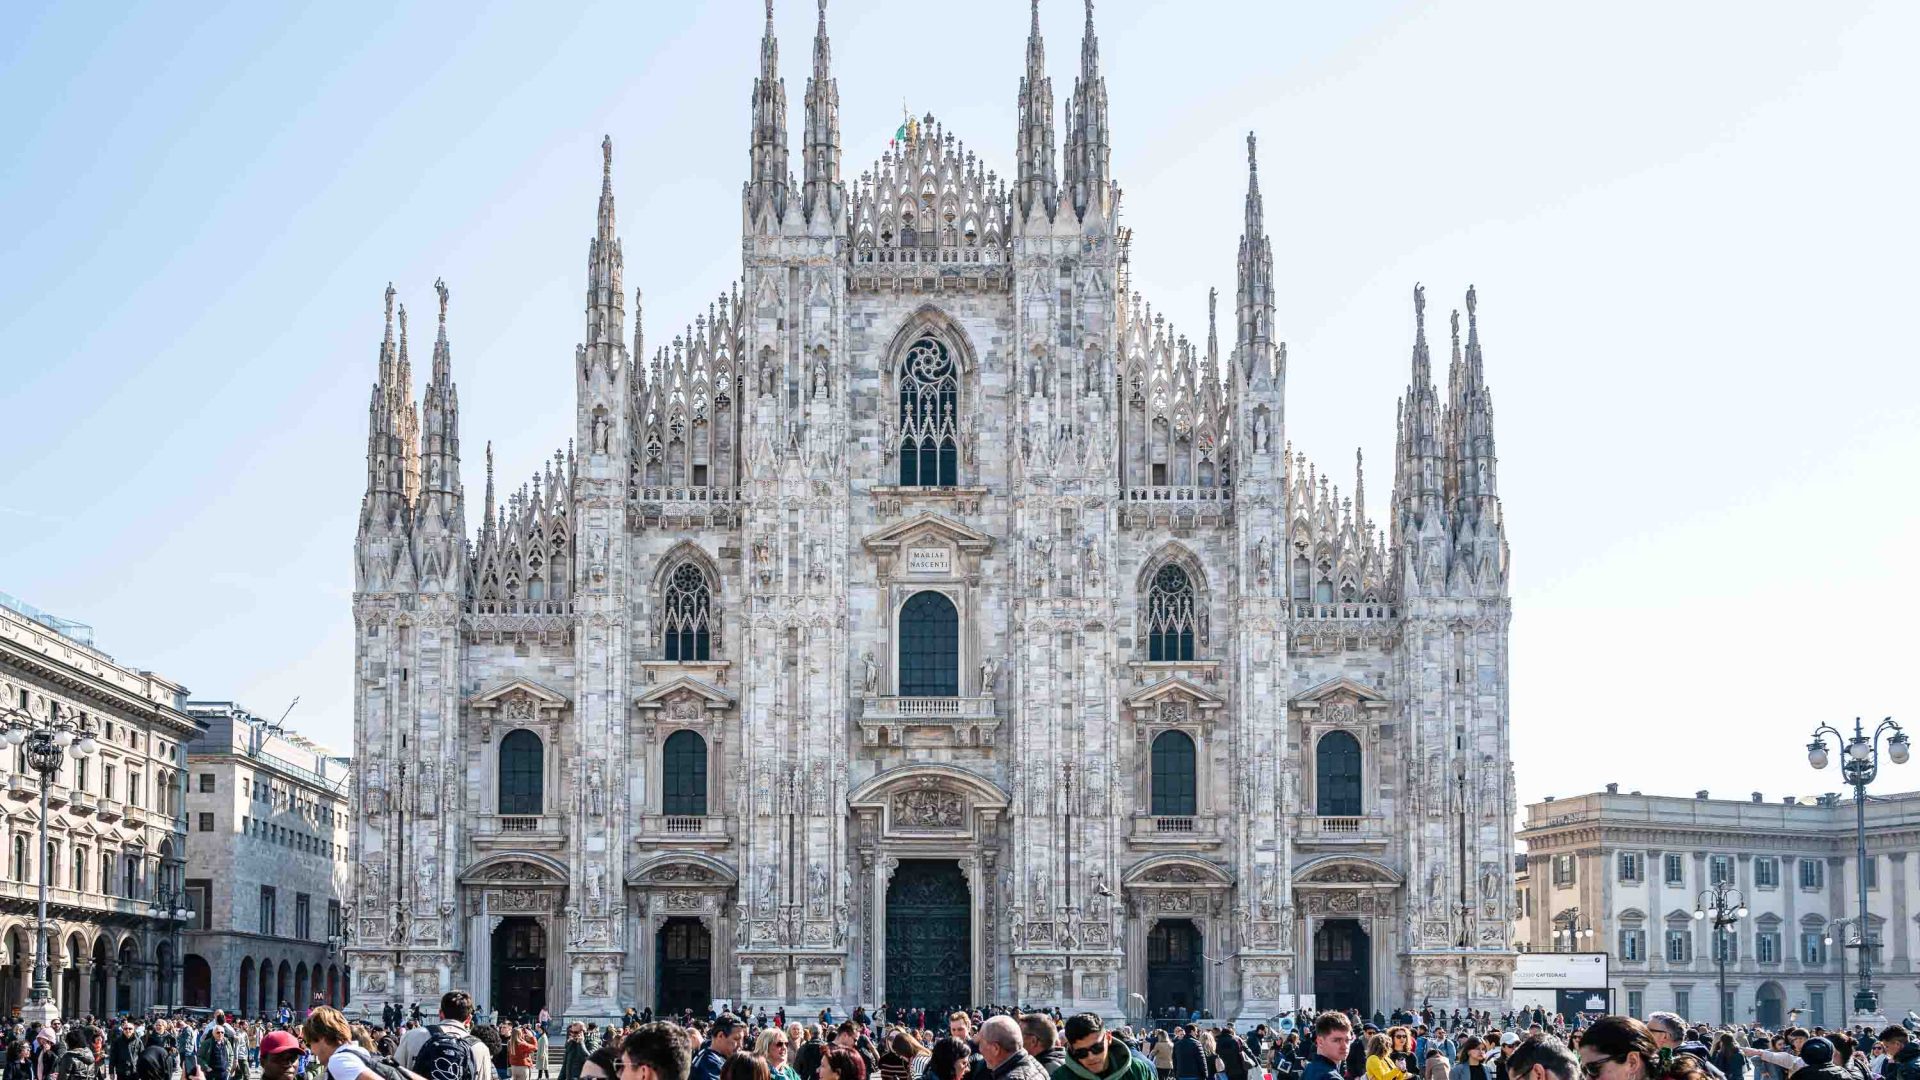 Crowds outside a cathedral in Milan, Italy.